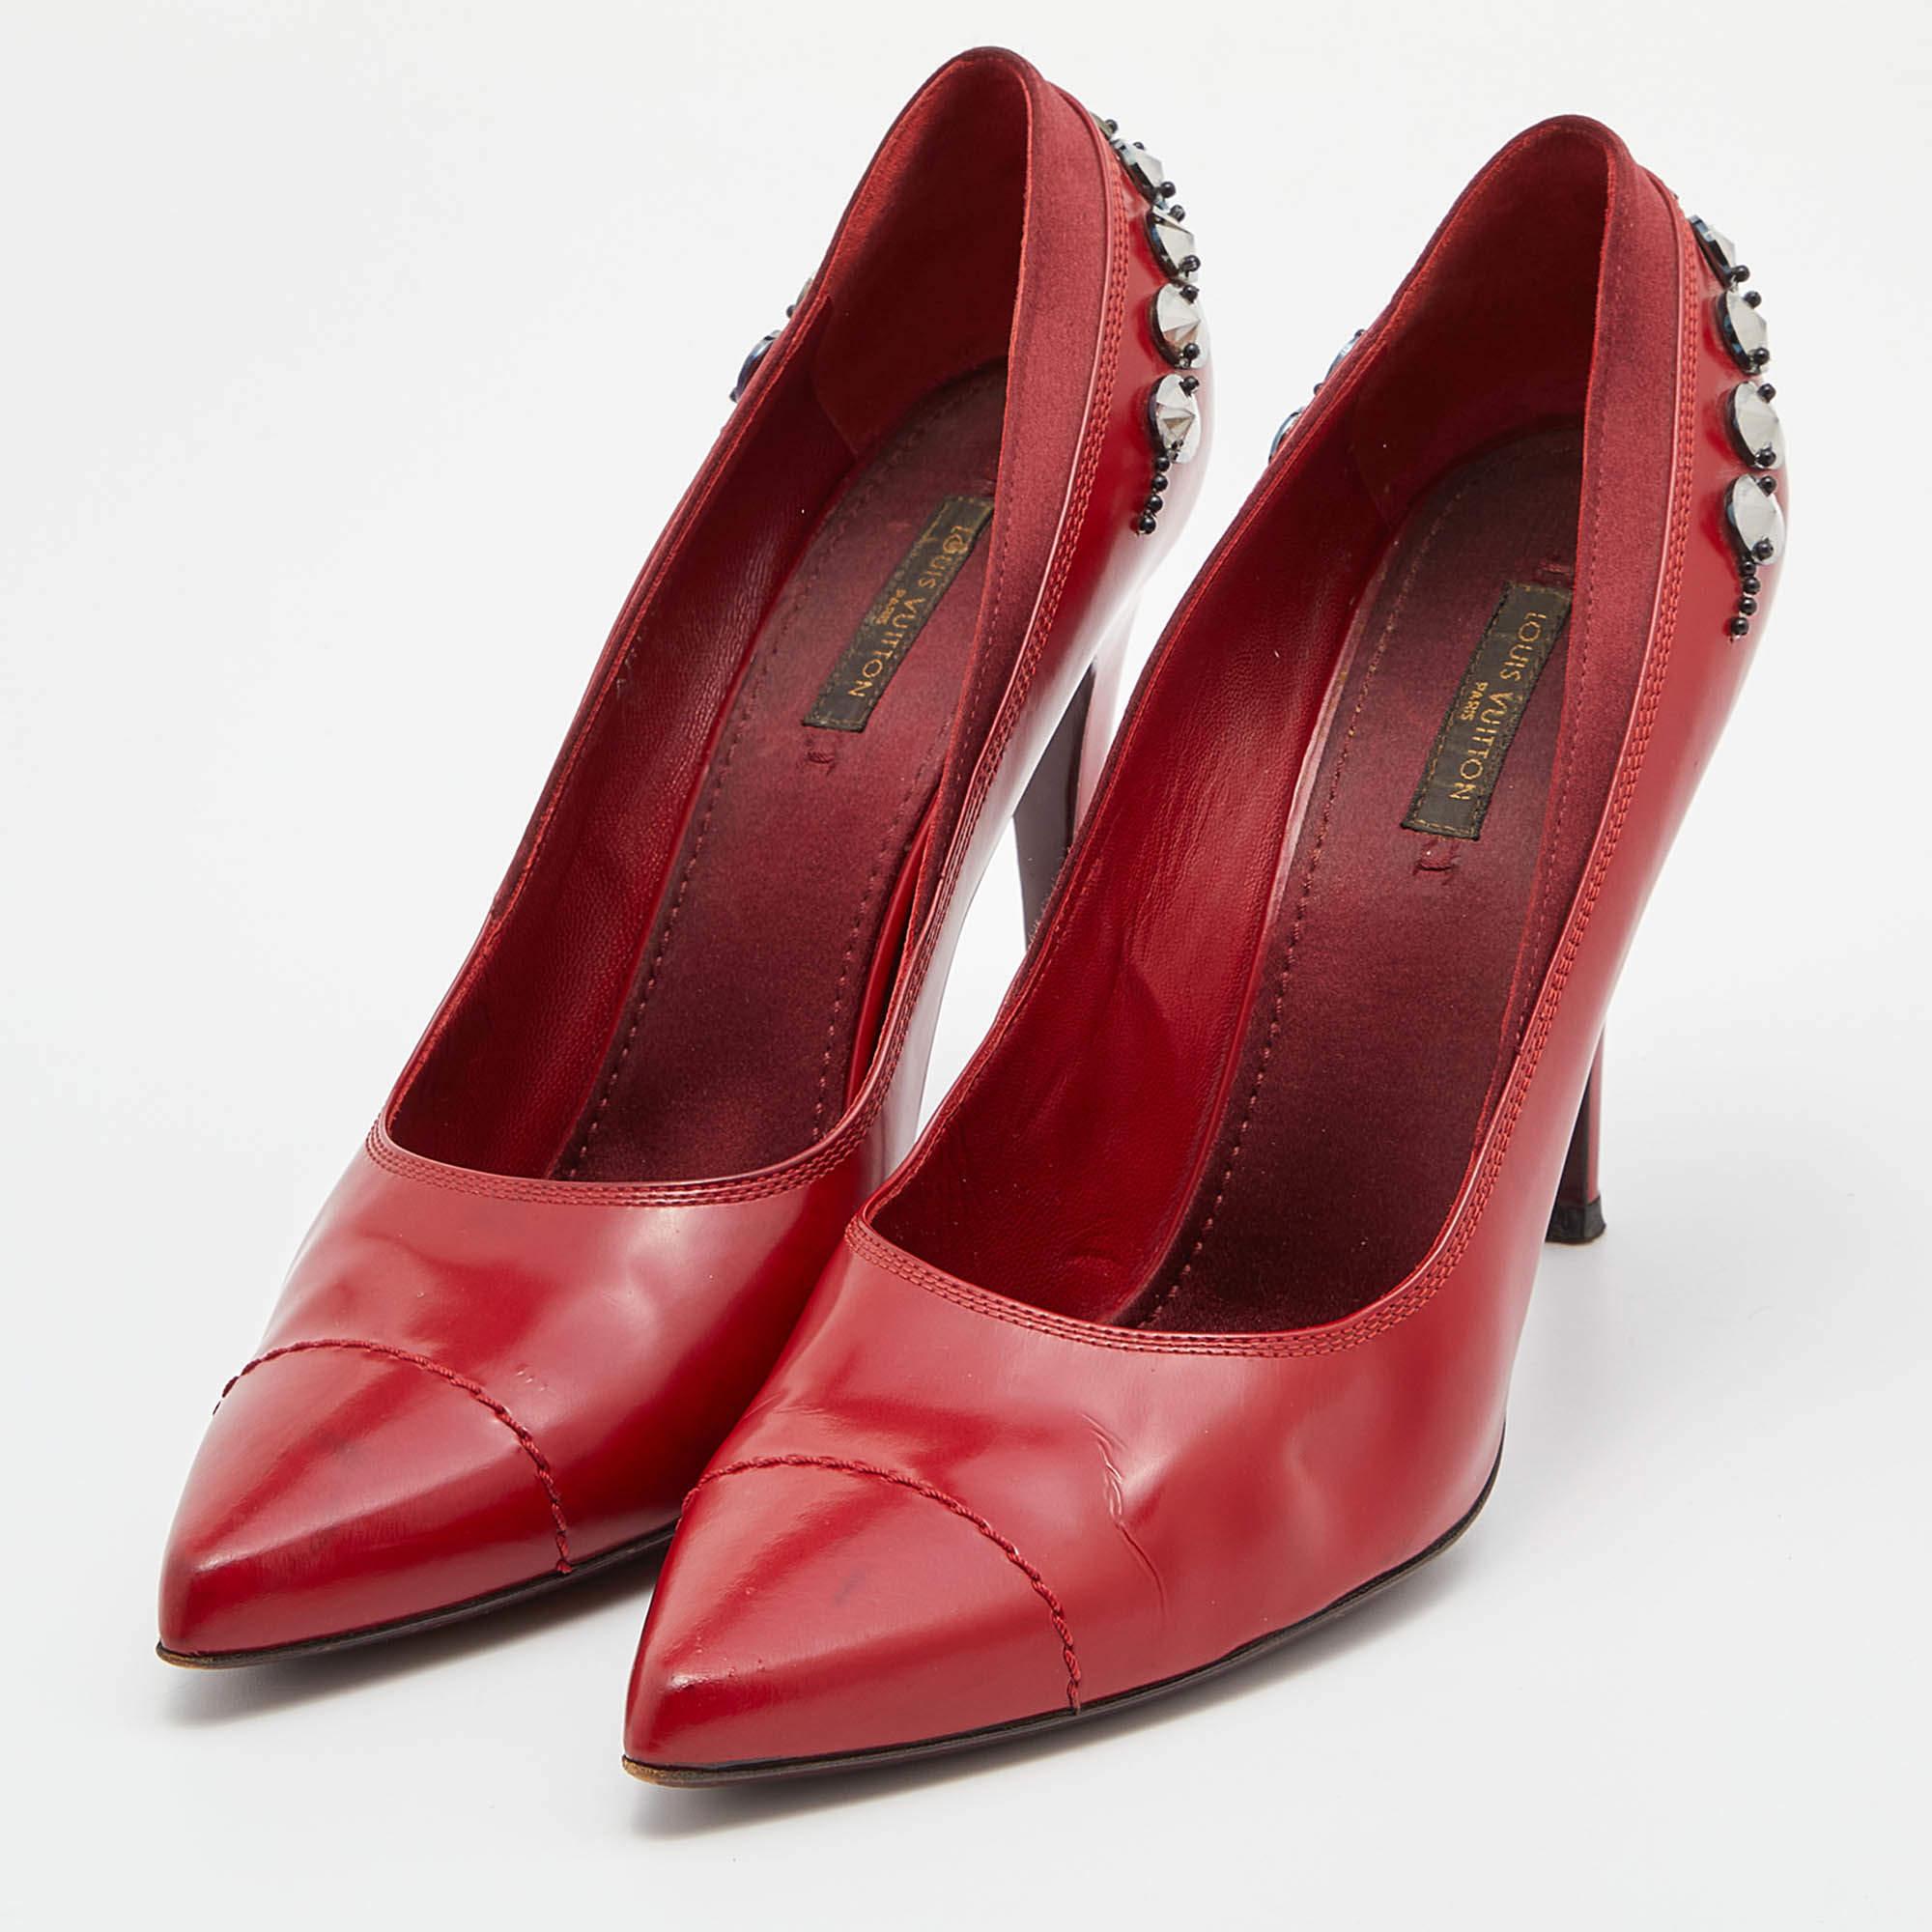 Dazzle the crowds and make a statement like never before in these gorgeous pumps from Louis Vuitton! These red-hued pumps have been crafted from satin and leather into a pointed toe silhouette and exquisitely embellished with crystal embellishments